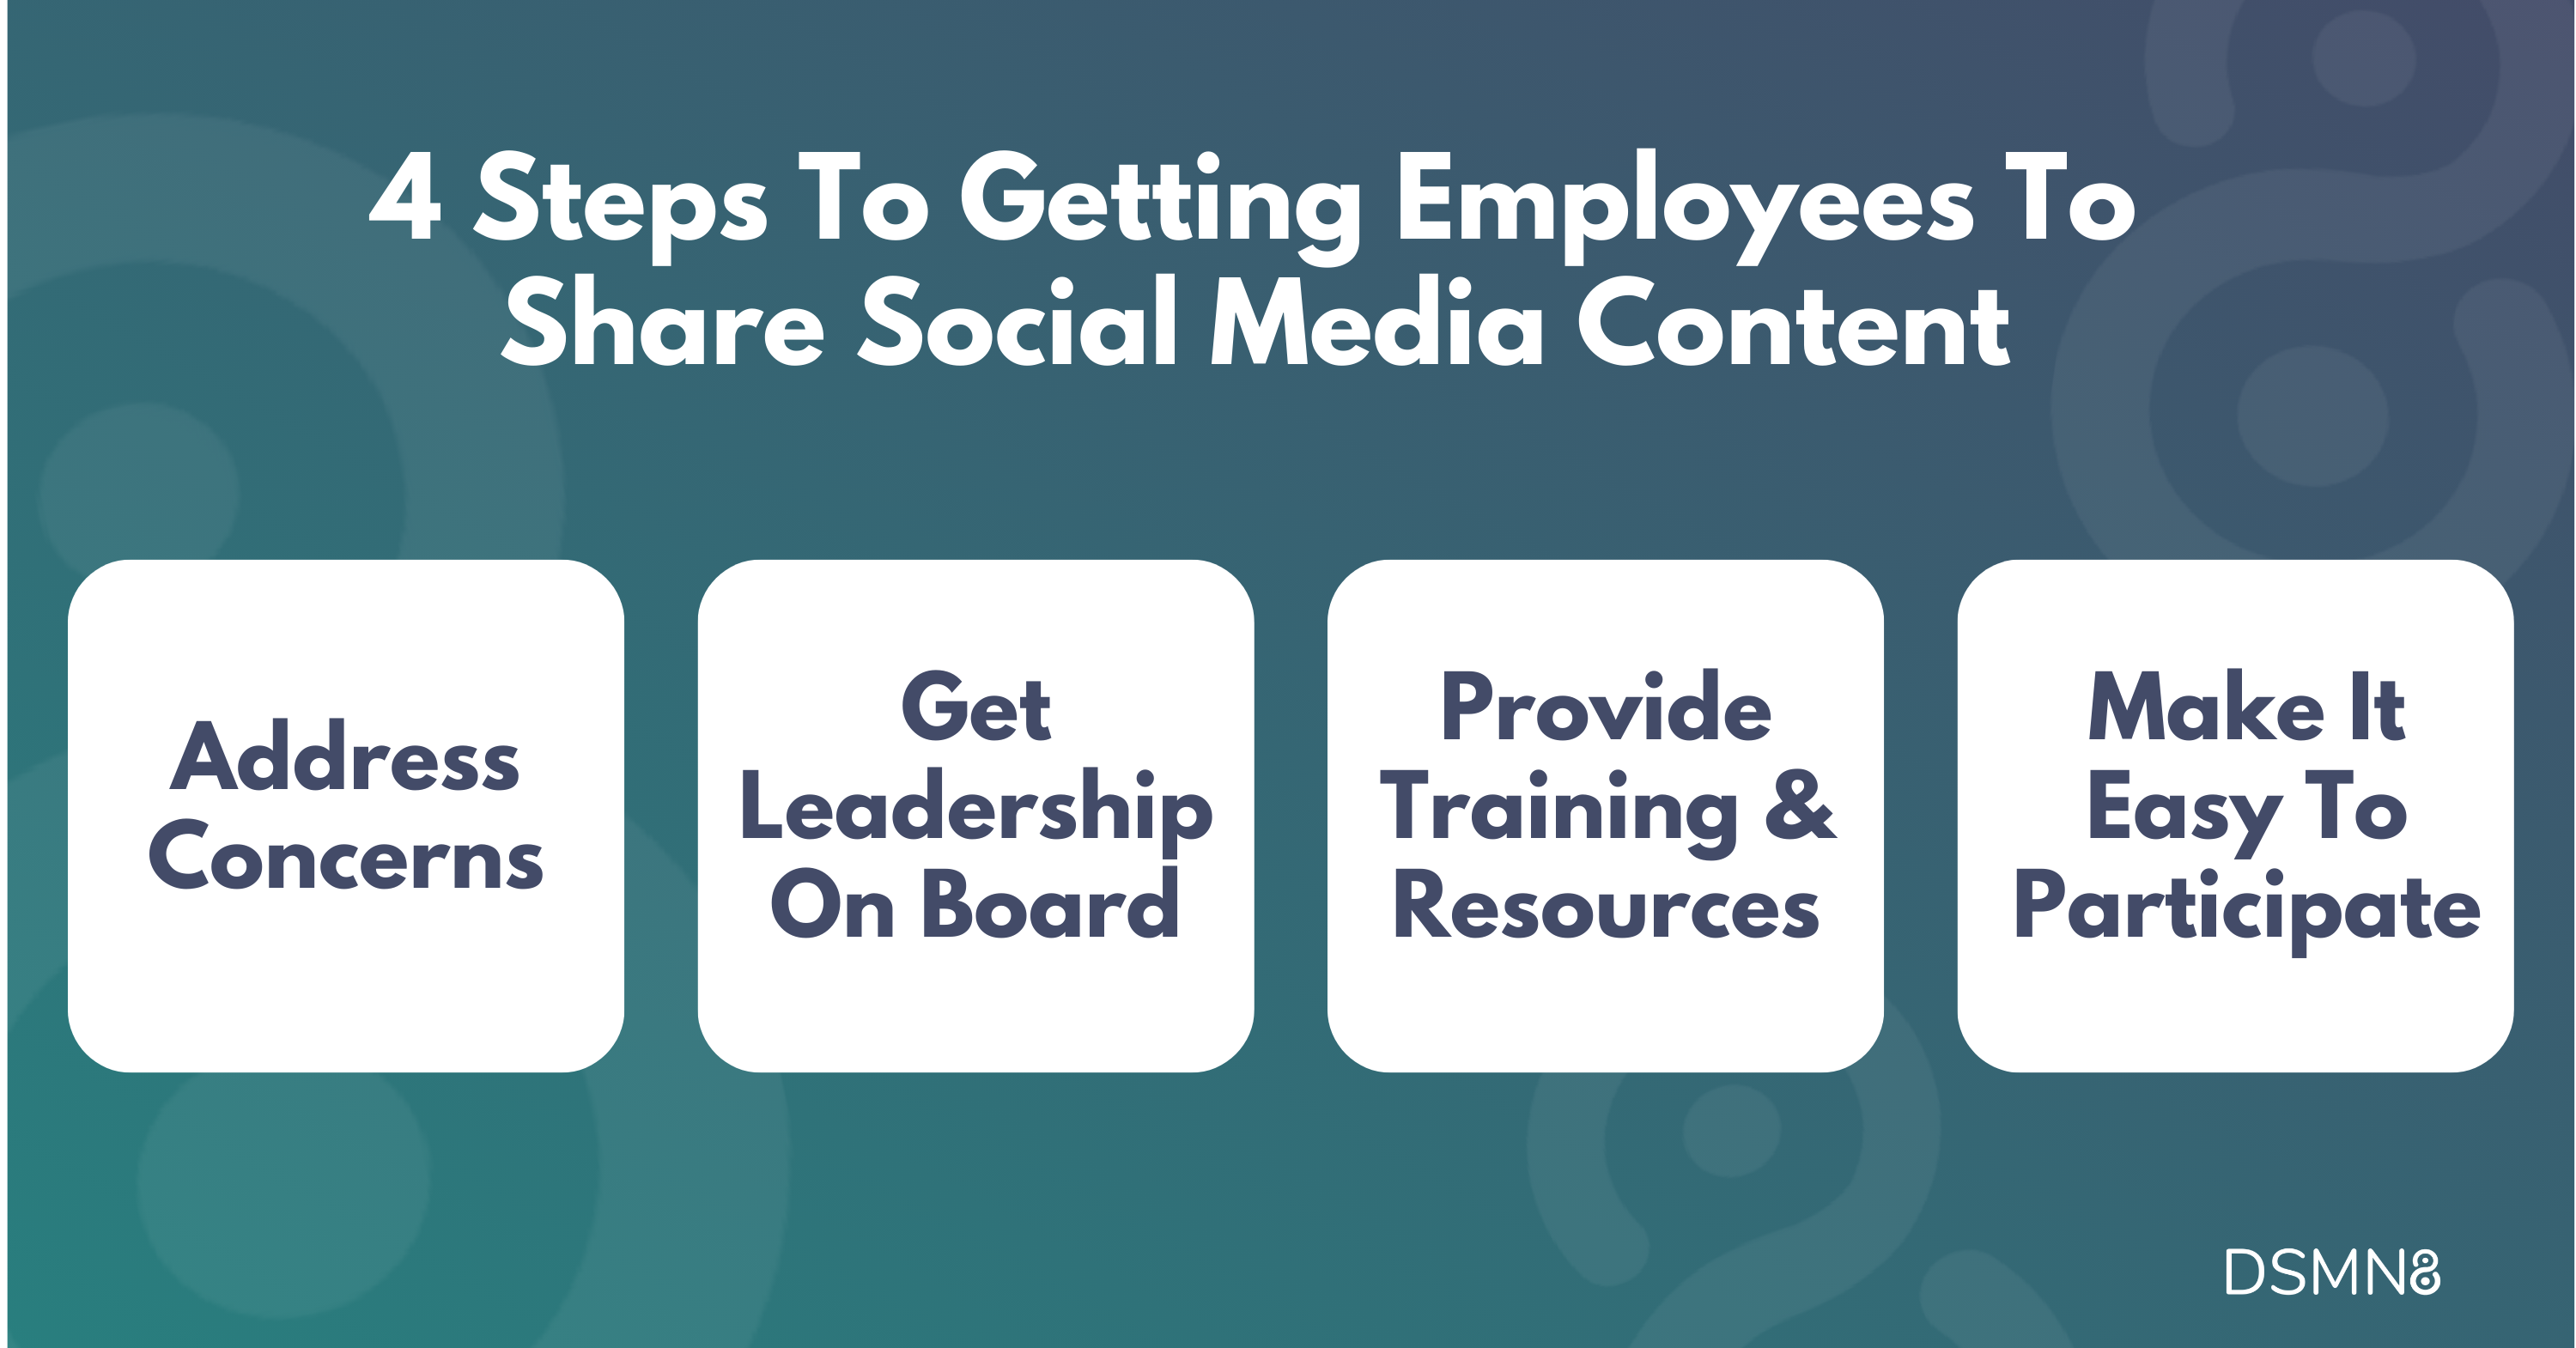 4 steps to getting employees to share social media content